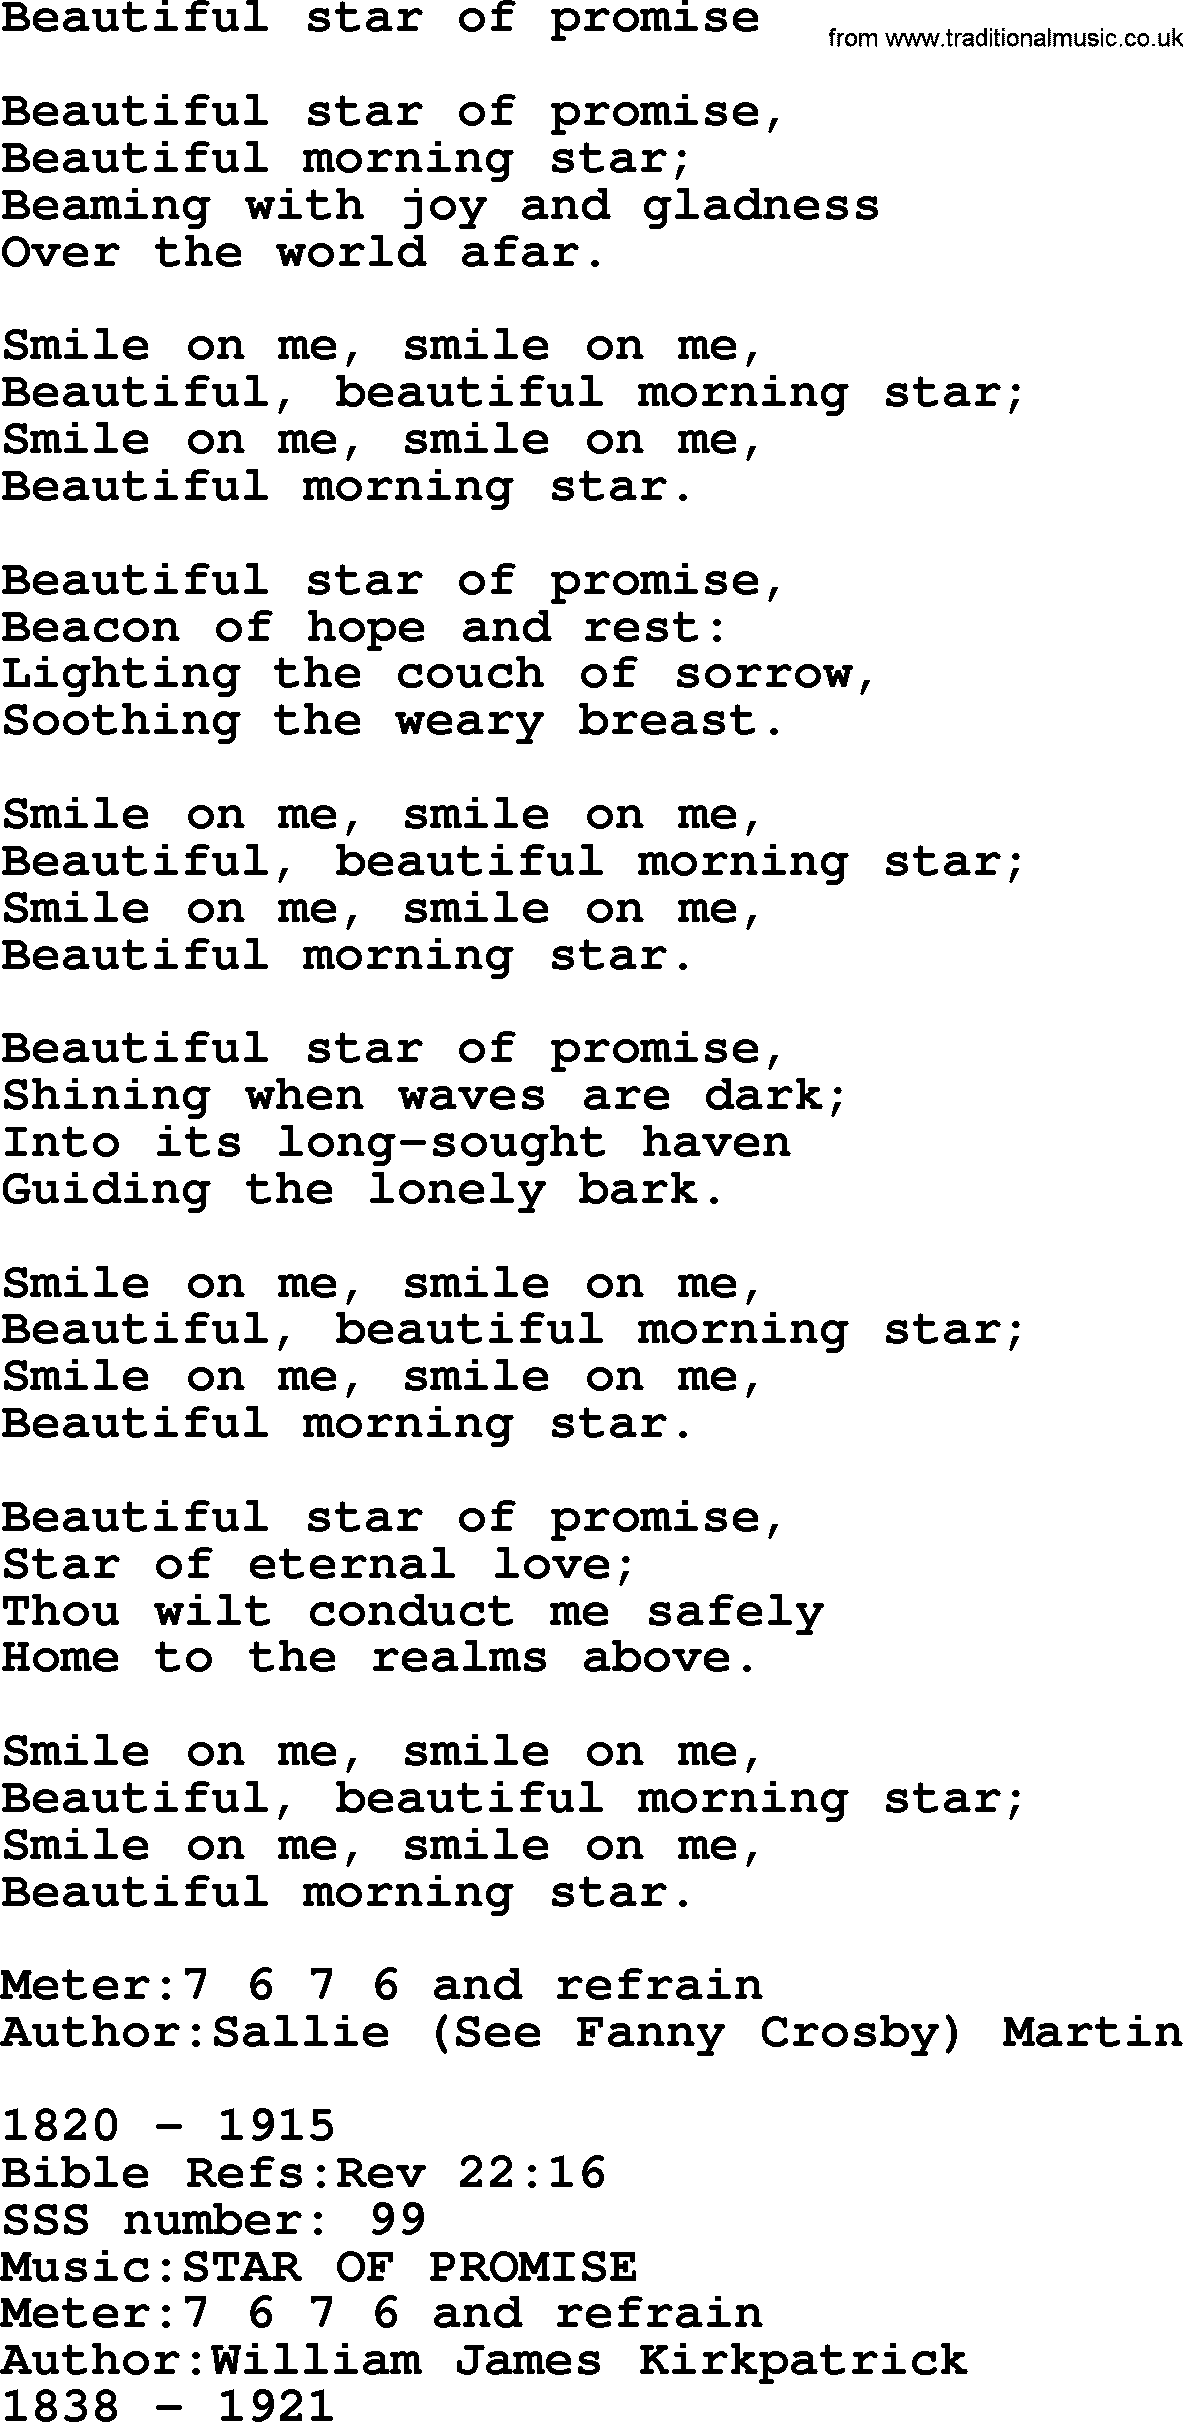 Sacred Songs and Solos complete, 1200 Hymns, title: Beautiful Star Of Promise, lyrics and PDF